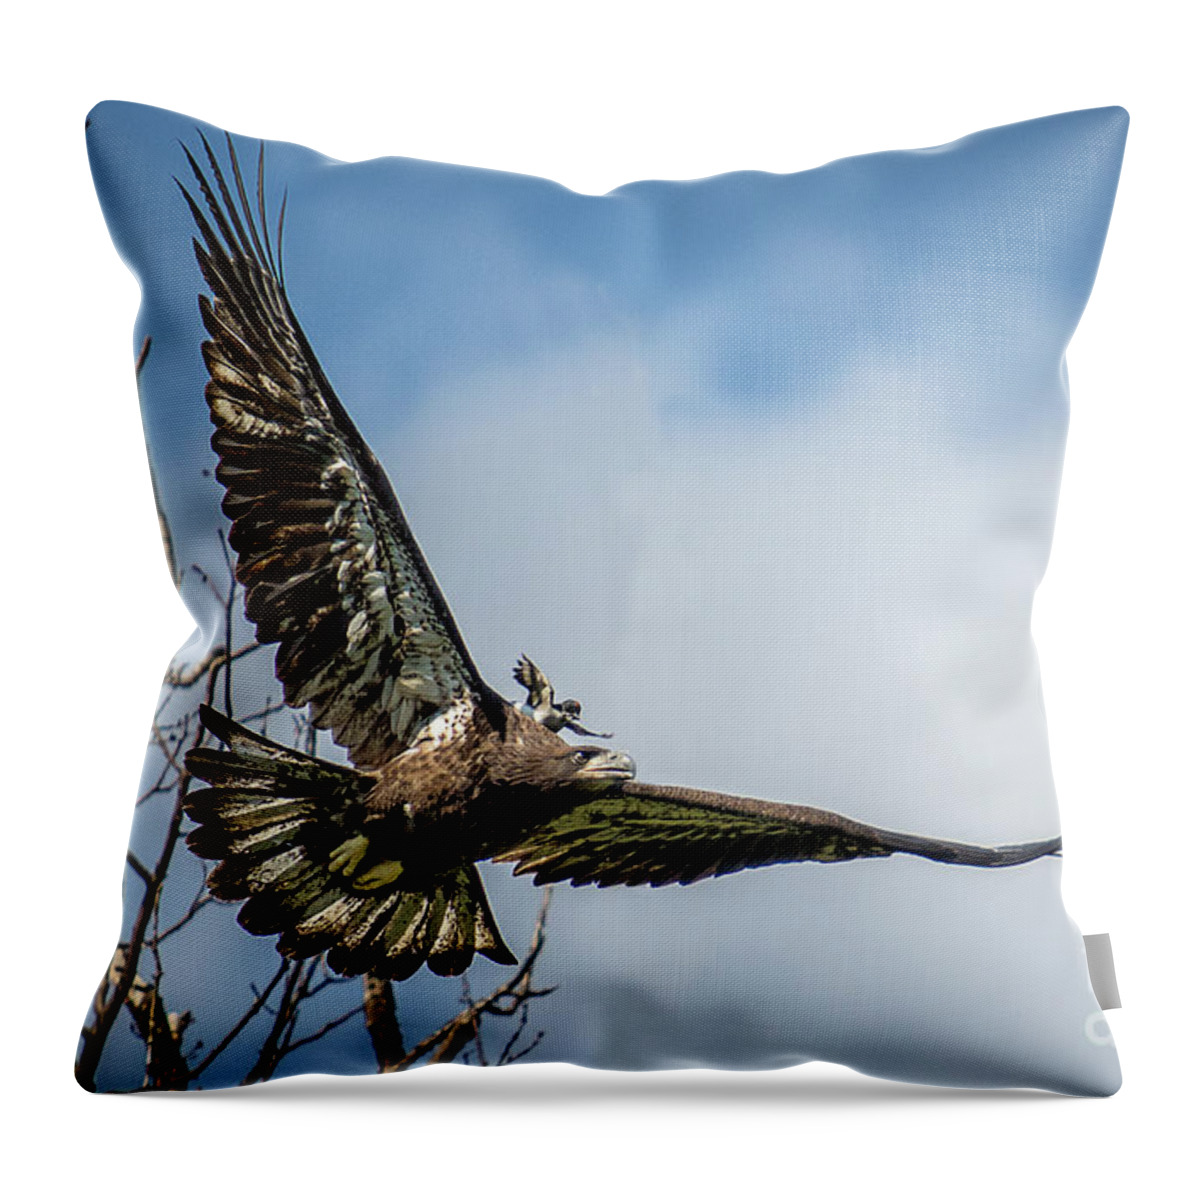 Raptor Throw Pillow featuring the photograph A Piggyback Ride by Eleanor Abramson